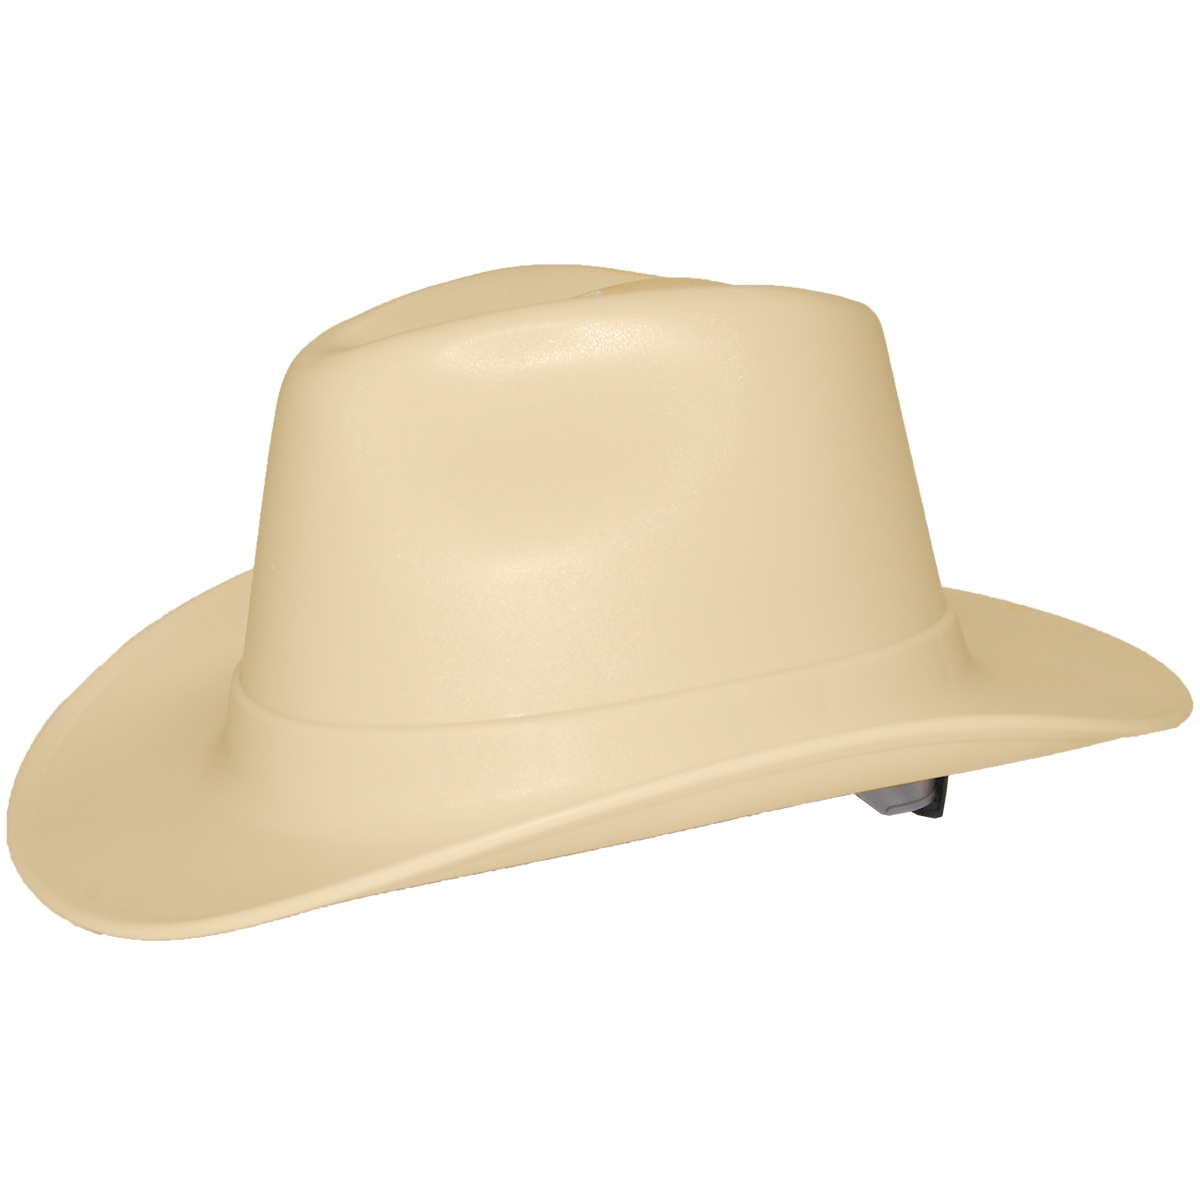 OccuNomix VCB200-T High Density Tan Cowboy Hard Hat - Industrial Safety  Products